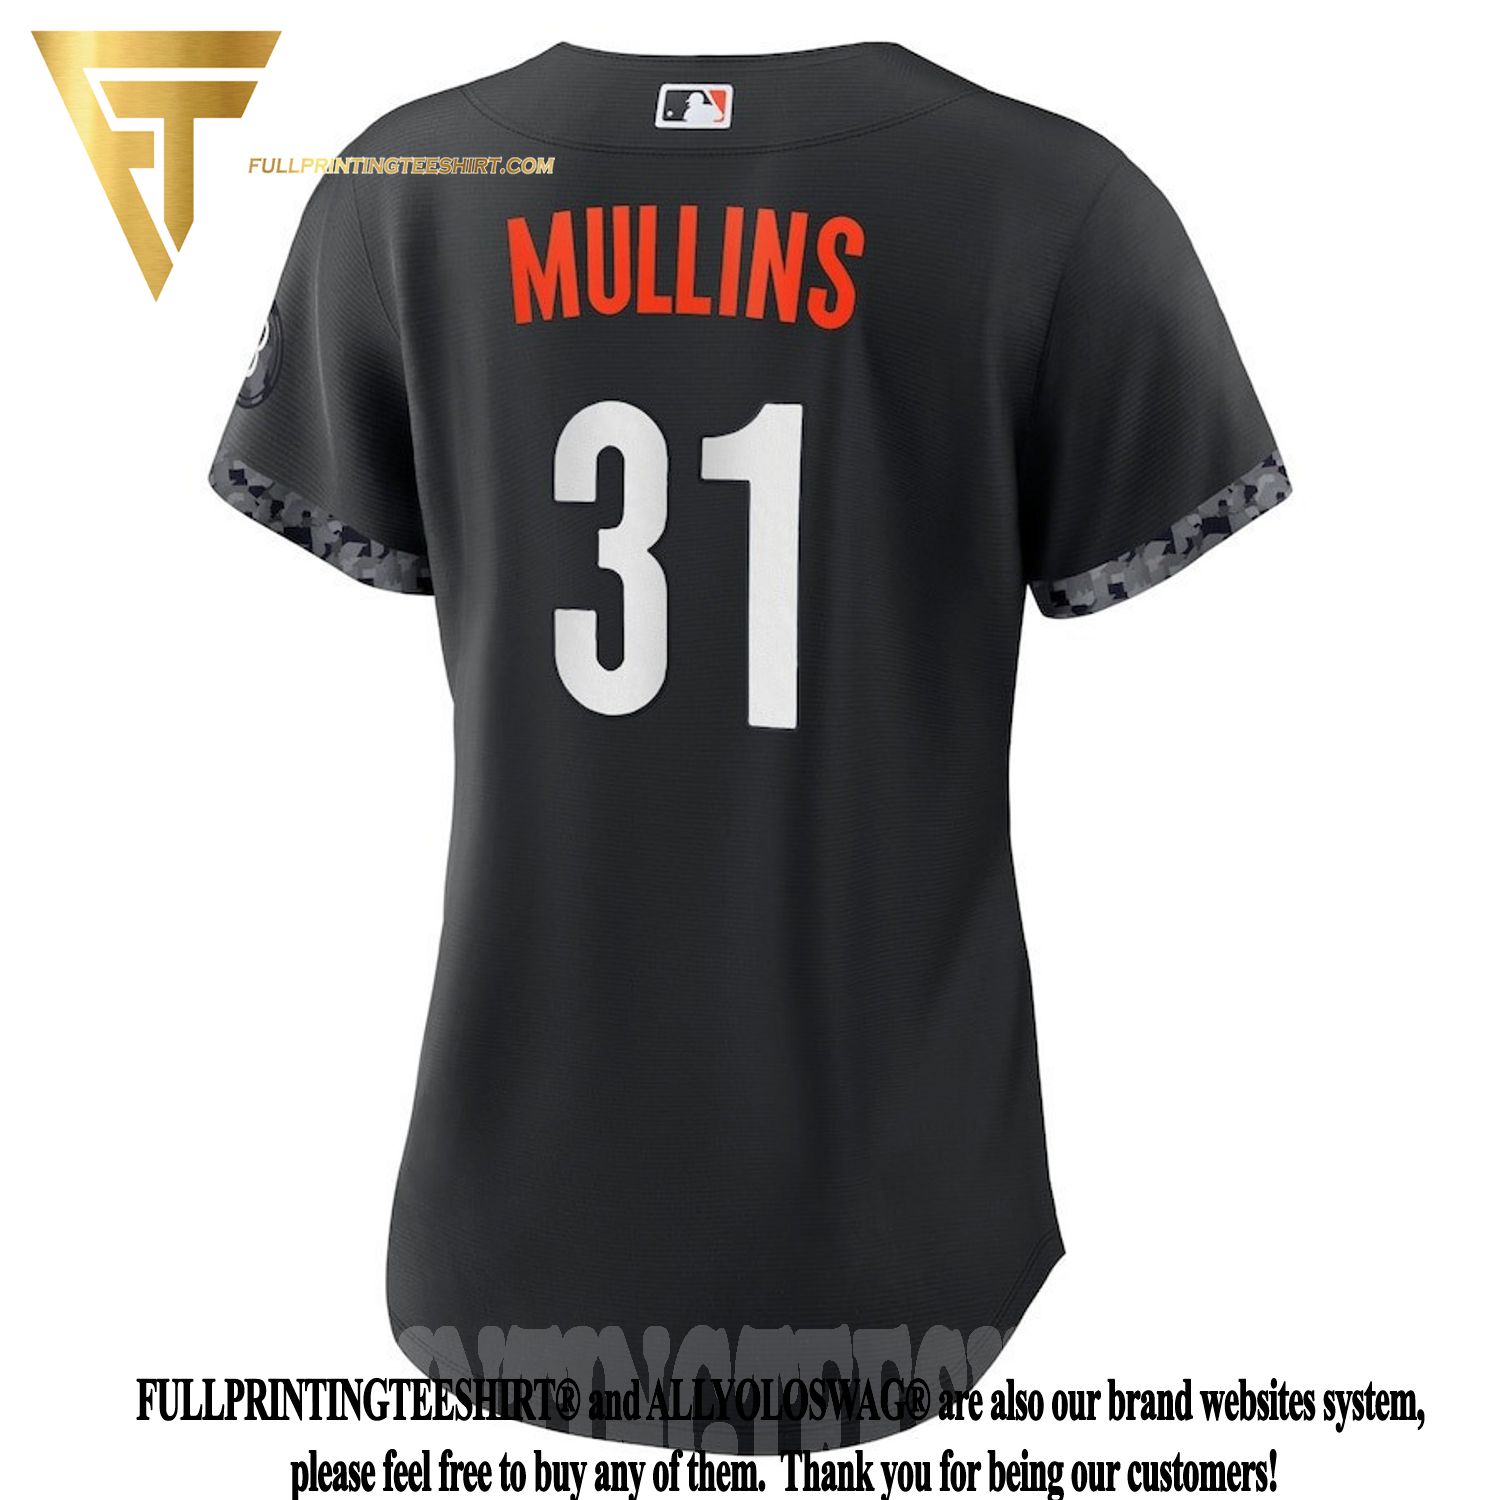 baltimore orioles womens jersey